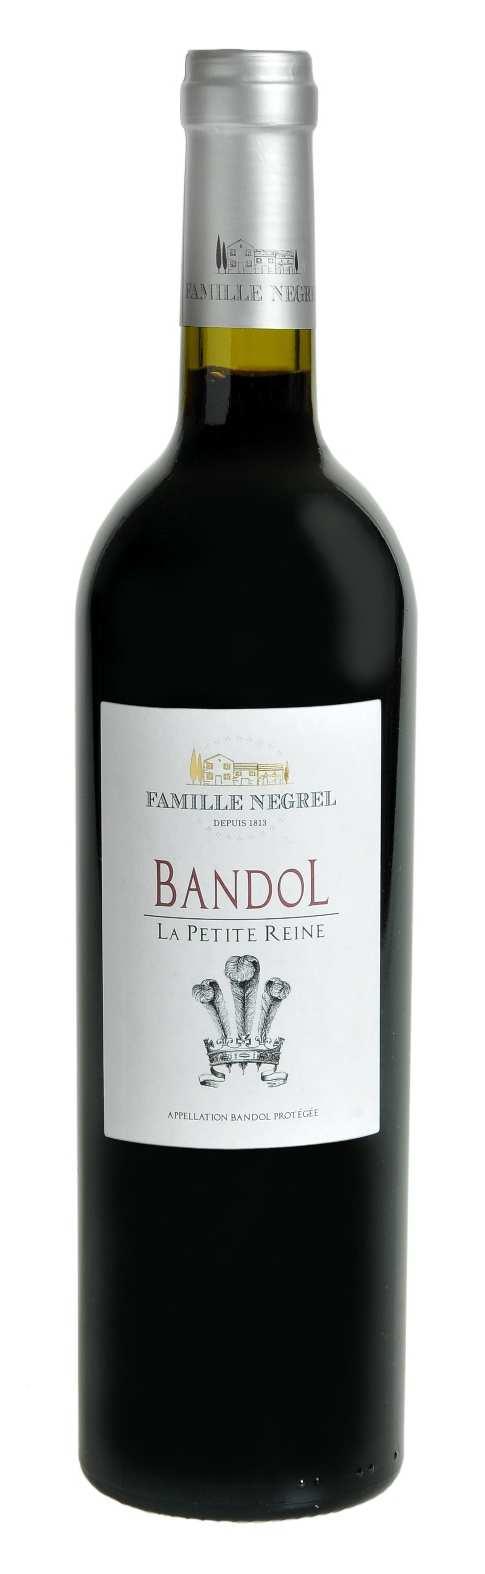 LA PETITE REINE RED AOP BANDOL The reputation of Bandol wines is built on its long history, its breathtaking location and the notoriety of great winemakers.